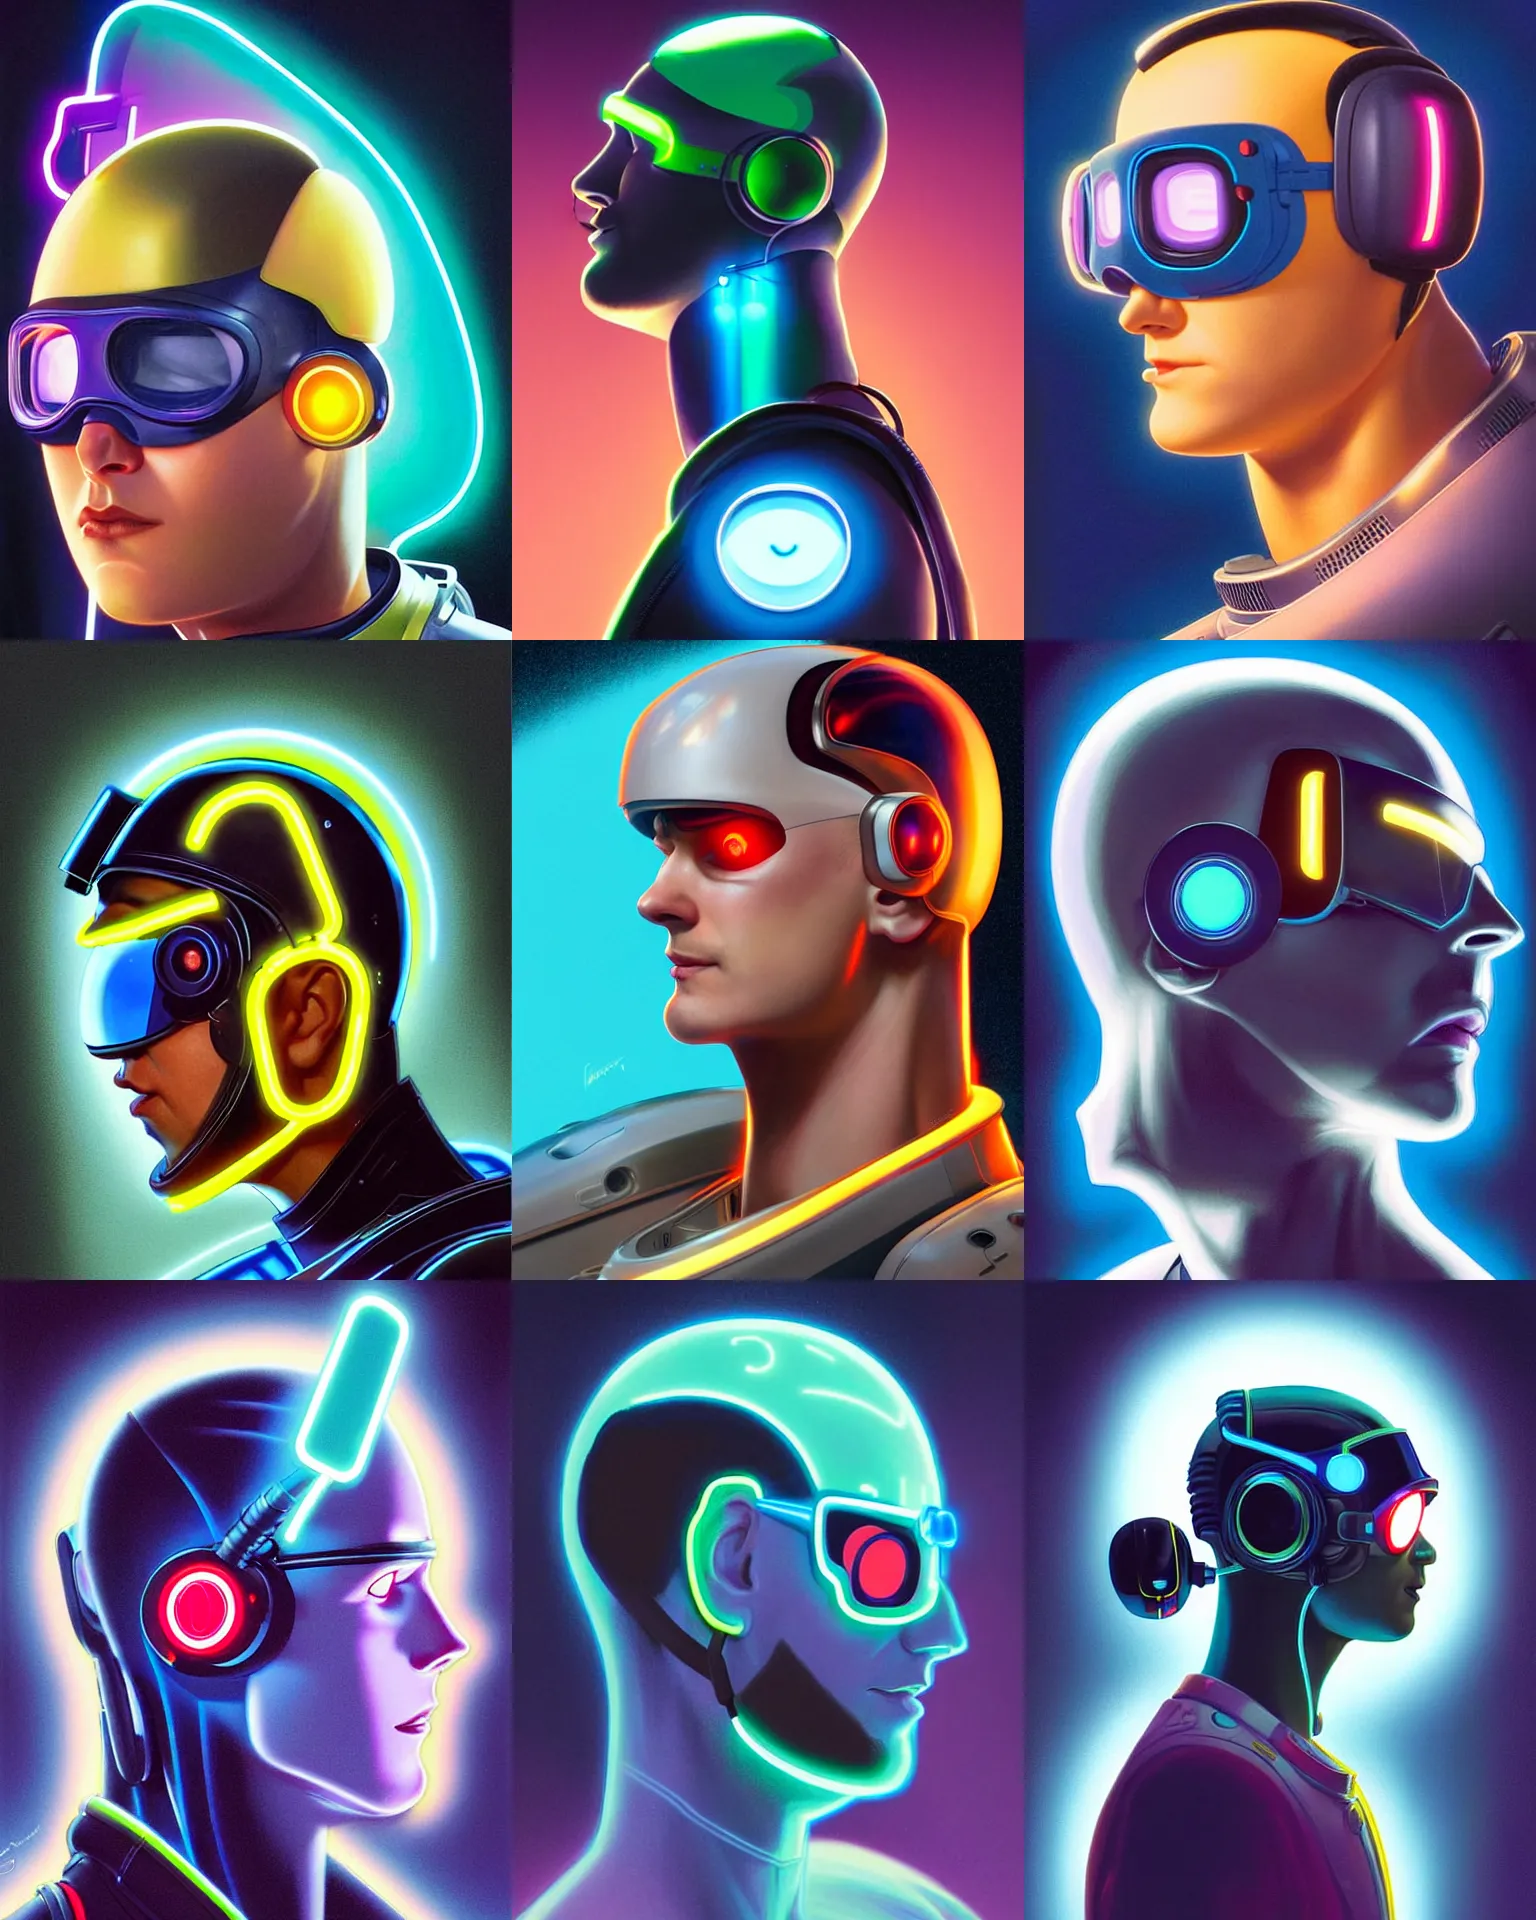 Prompt: pixar character backlit side view future coder man, stylized cyclops display over eyes and sleek glowing headset, neon accents, holographic colors, desaturated headshot portrait digital painting by leyendecker, donato giancola, philip coles, ivan bilibin, john berkey, astronaut cyberpunk electric lights profile